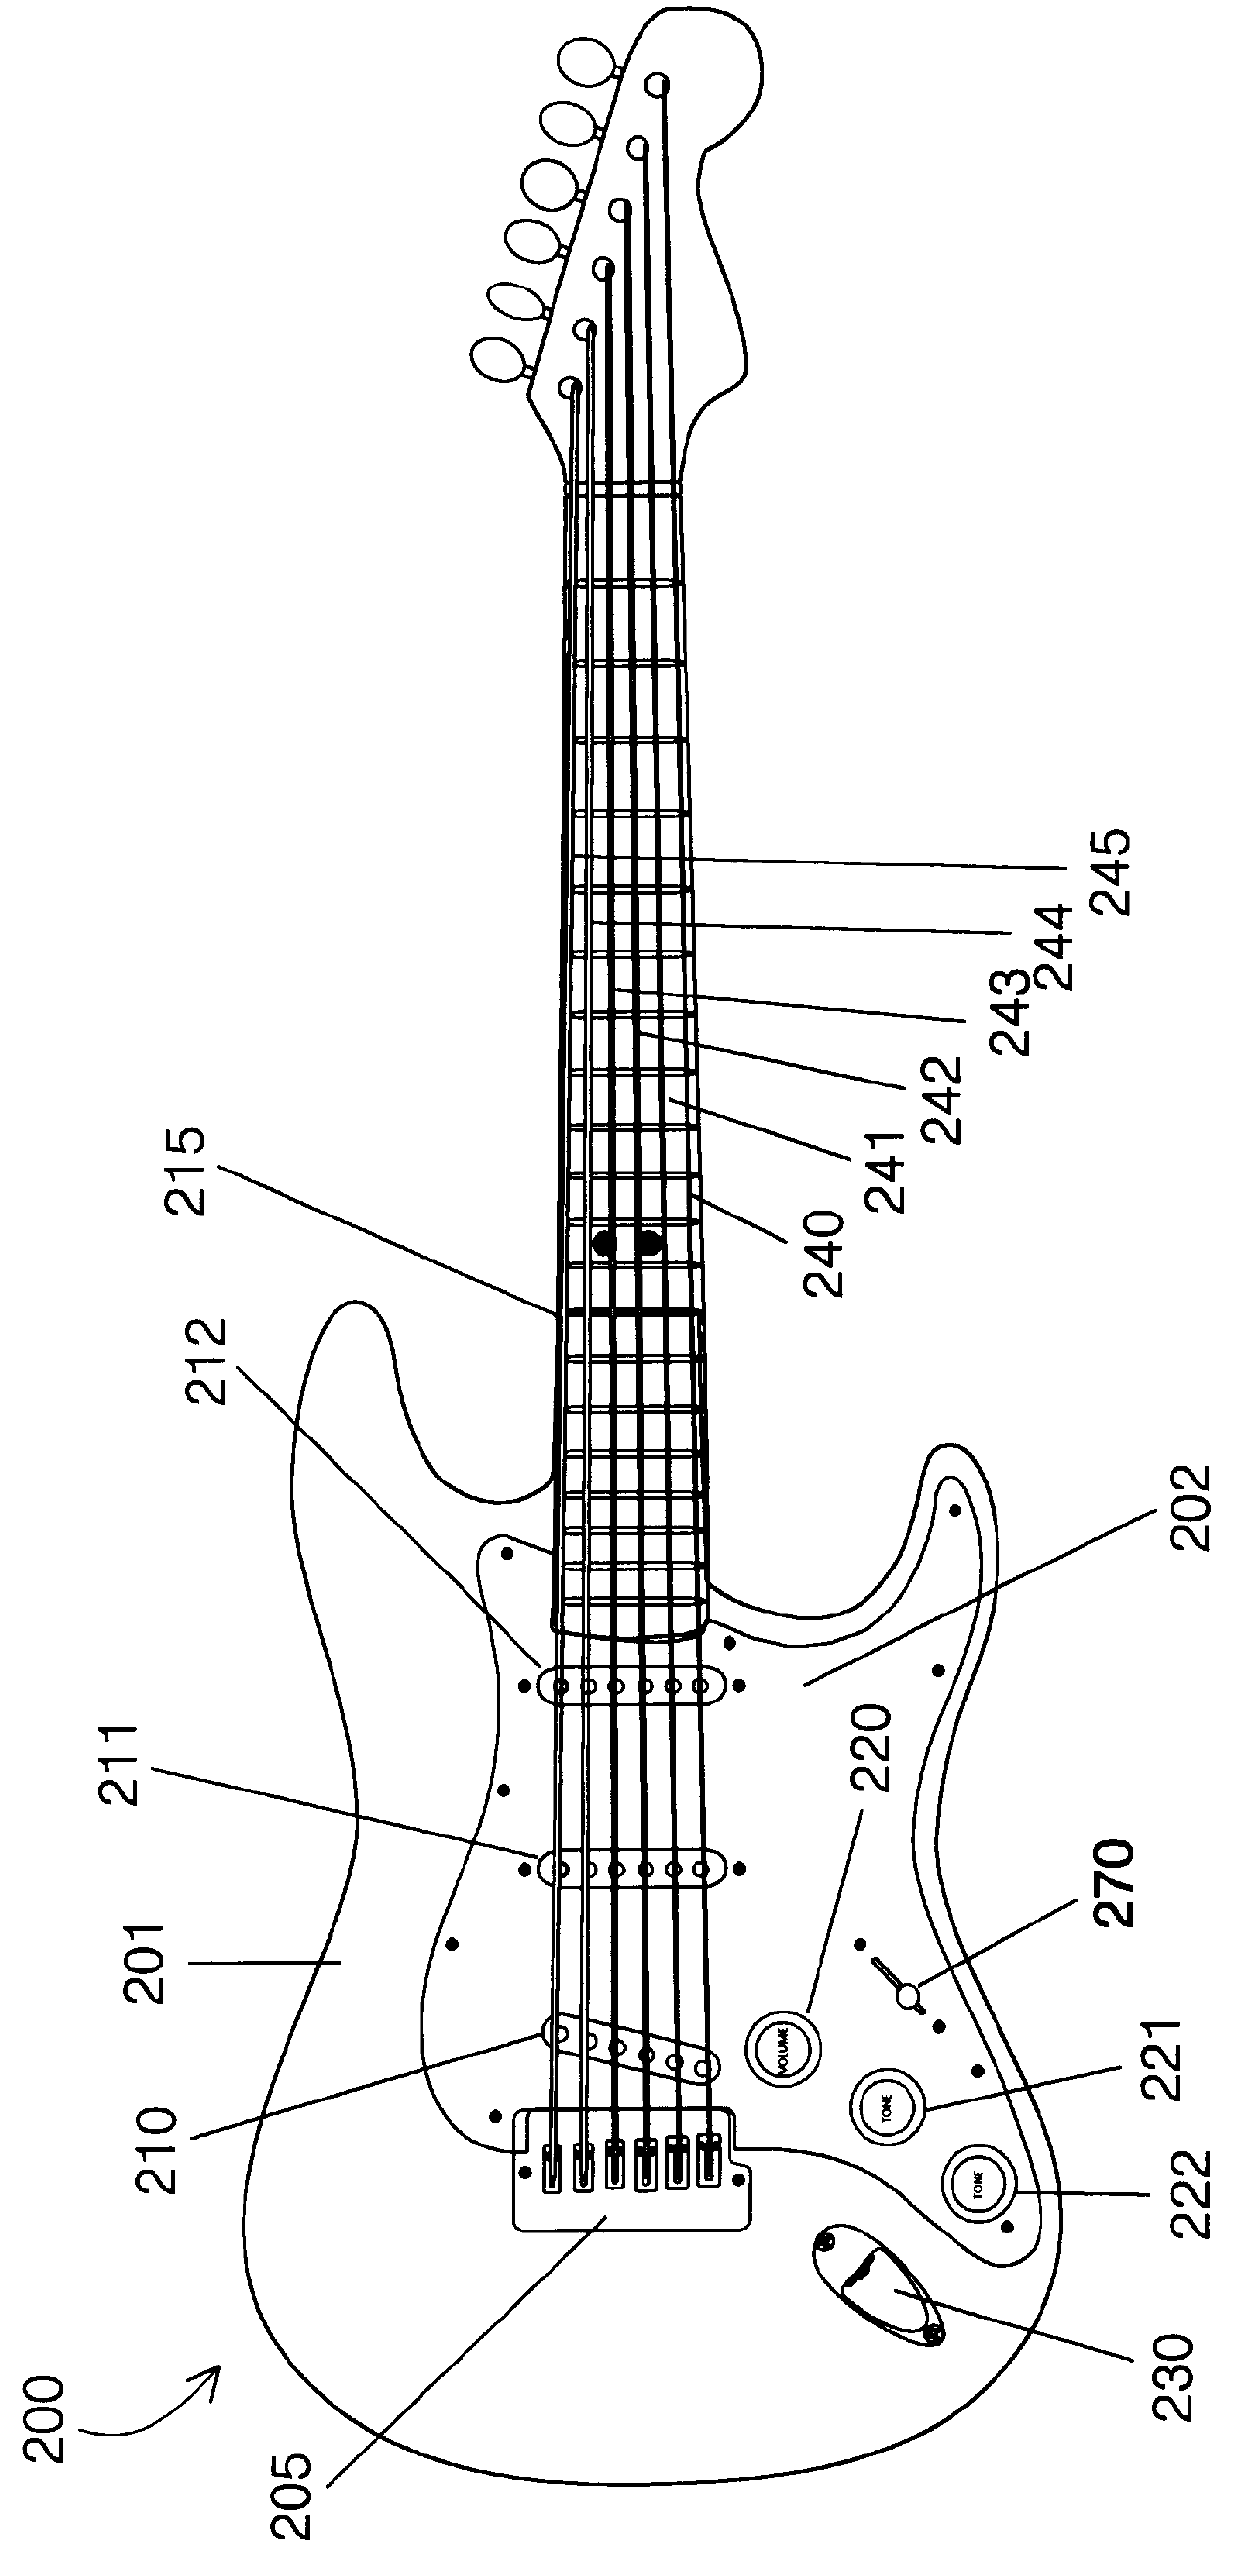 Controls for musical instrument sustainers